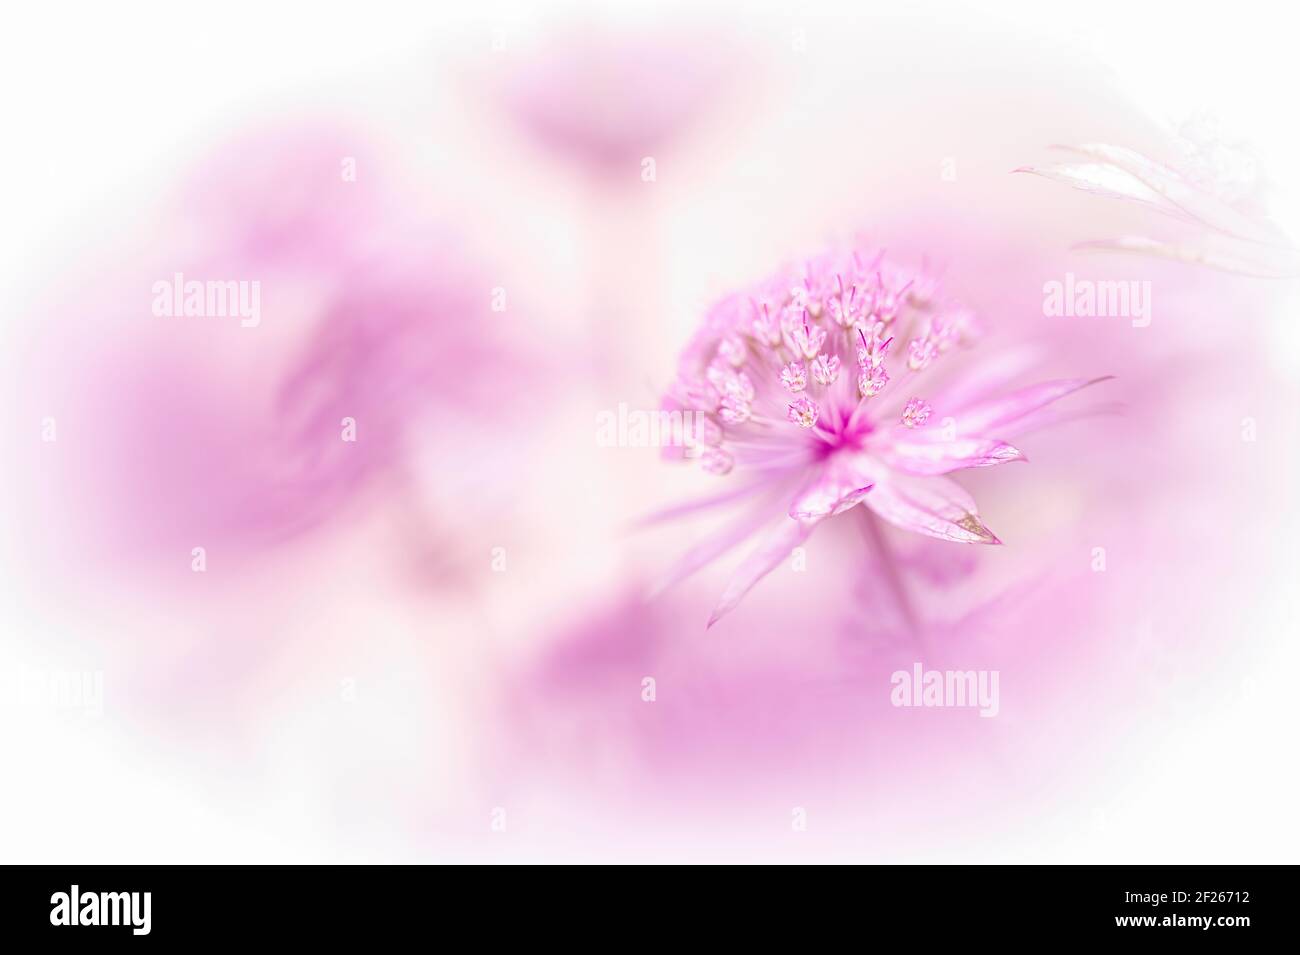 A high key image of a single masterwork or Astrantia Roma flower amongst blurred pink Astrantia flowers against a white background with empty space. Stock Photo